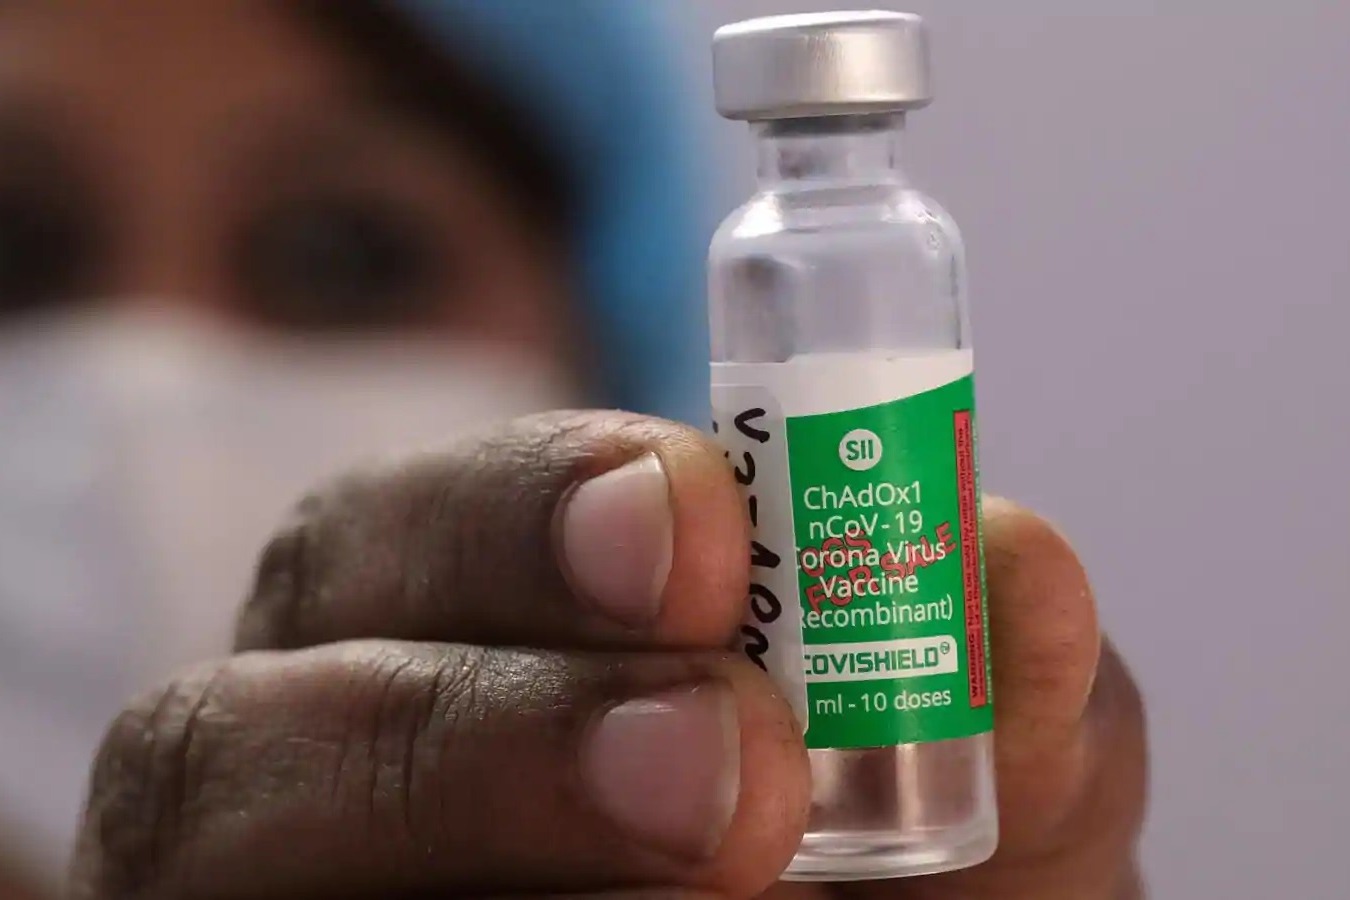 Global health officials back AstraZeneca vaccine after South Africa study rings alarm